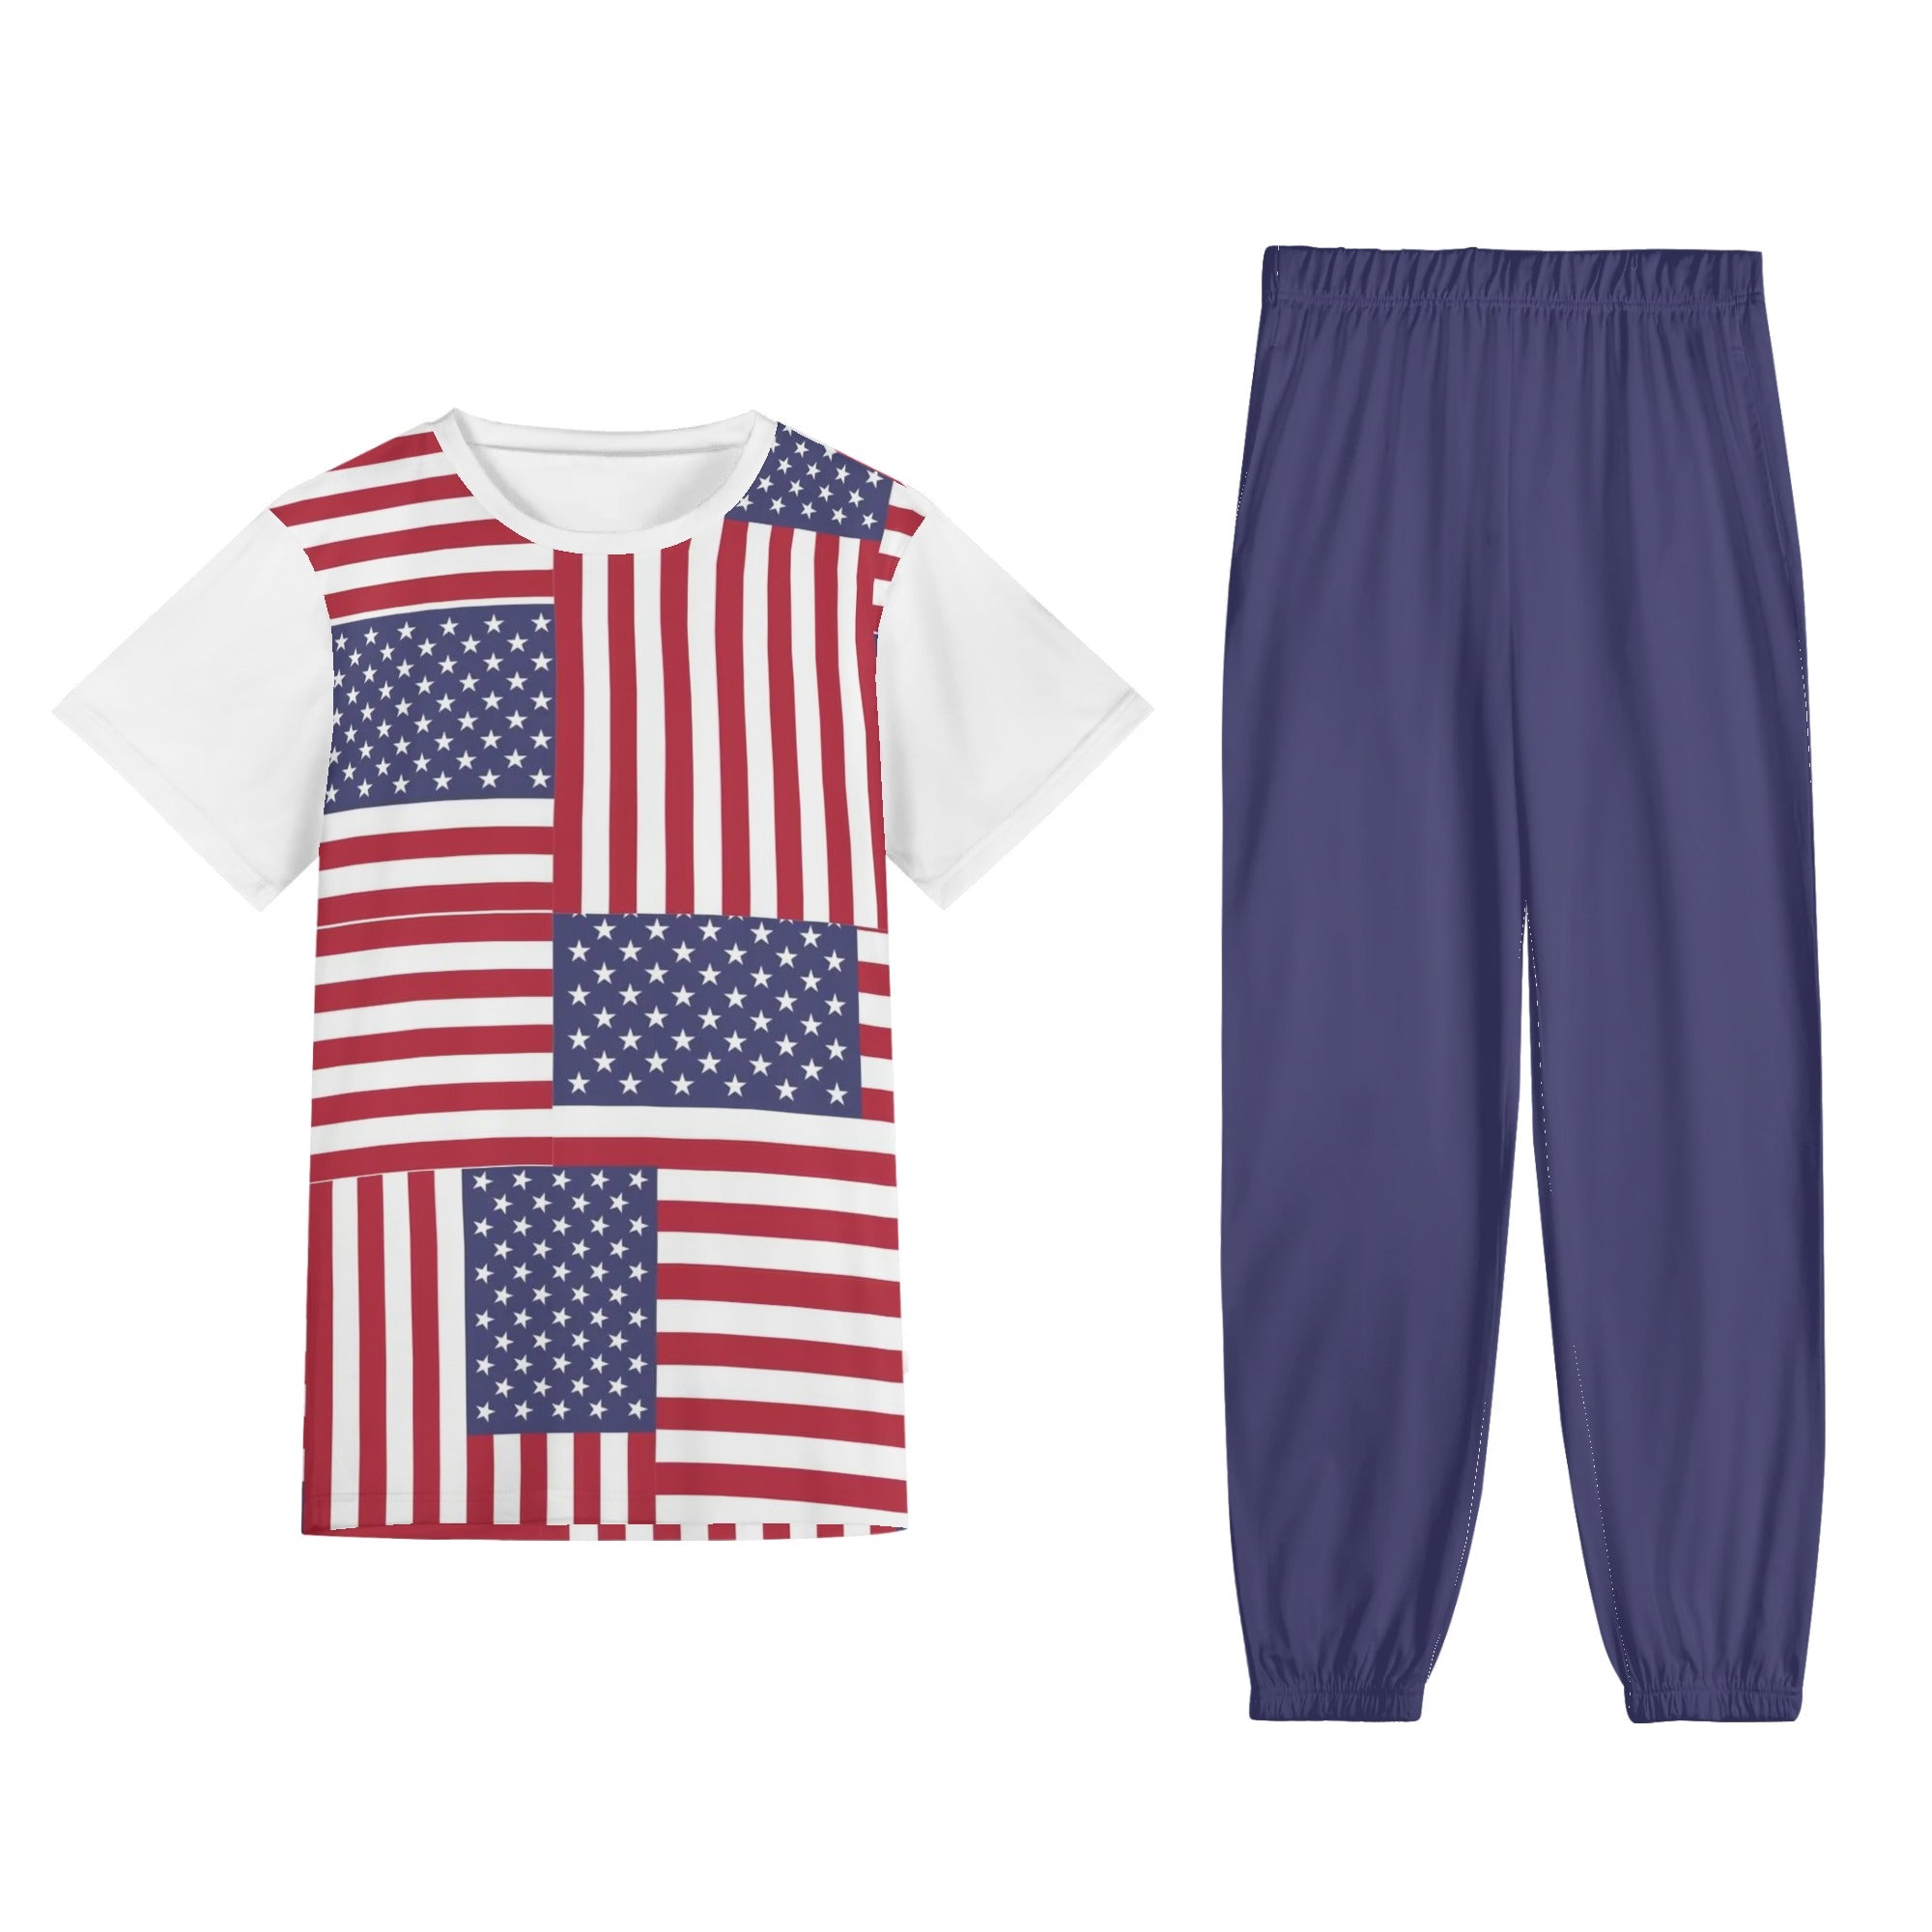 Blue-White - 4th of July Patriotic Short Sleeve Sports Outfit Set - unisex pants set at TFC&H Co.